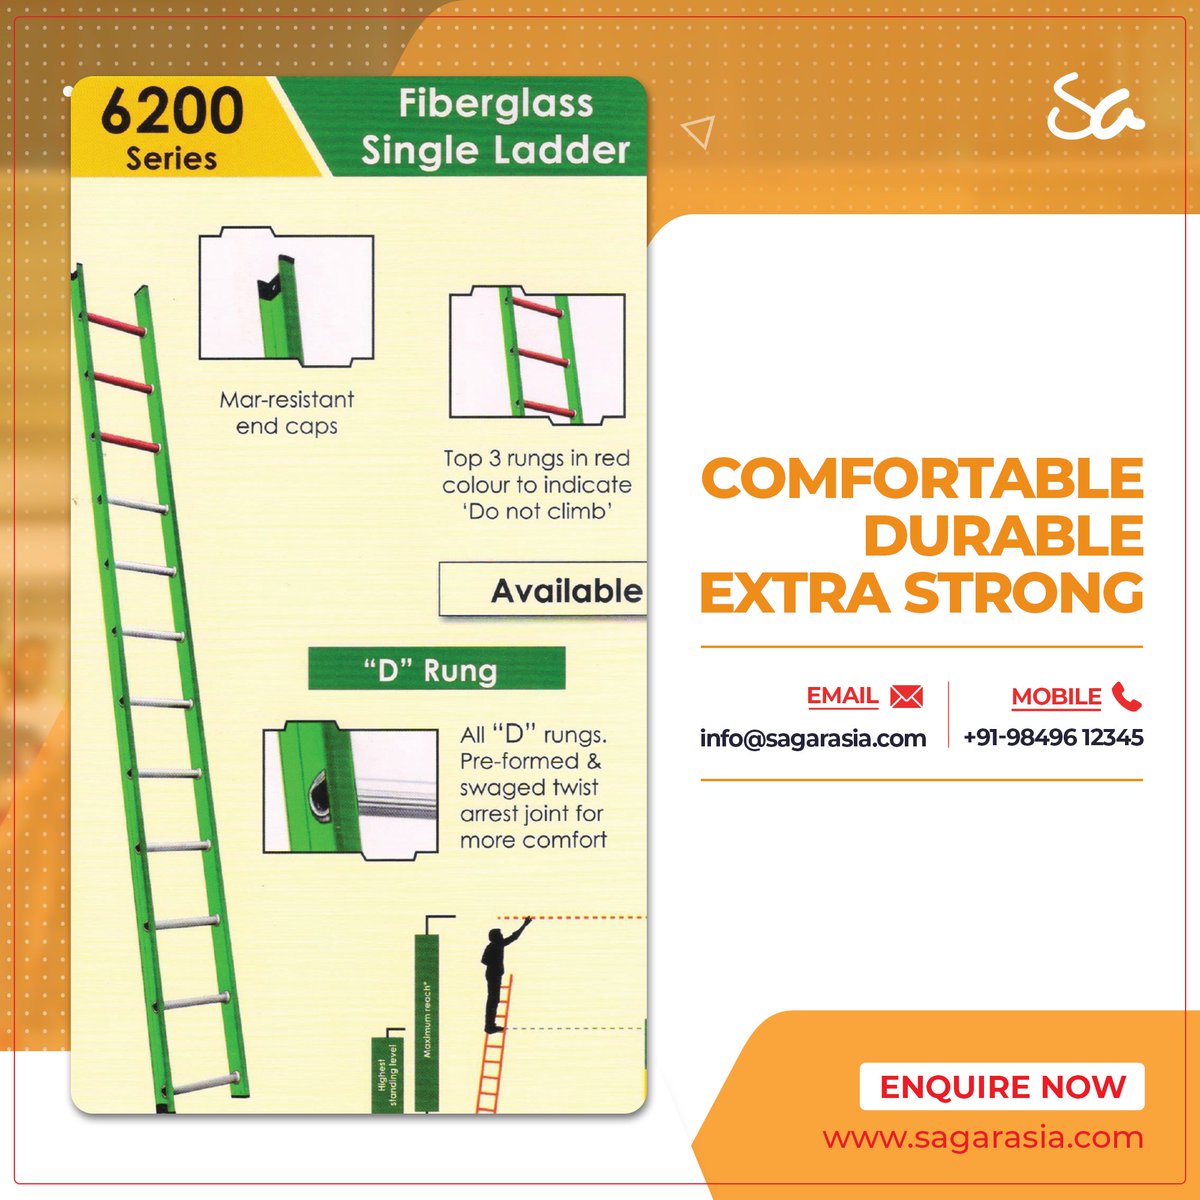 Safety features of this Single Ladder: 👉 Non-conductive fiberglass side rails 👉 Top 3 rungs red - “Do not climb” 👉 Non-slip shoes. Mar-resistant end caps at the top

Email id: info@sagarasia.com
Mobile: +91-98496 12345

#Liberti #SagarAsia #FibreglassLadders #SingleLadder